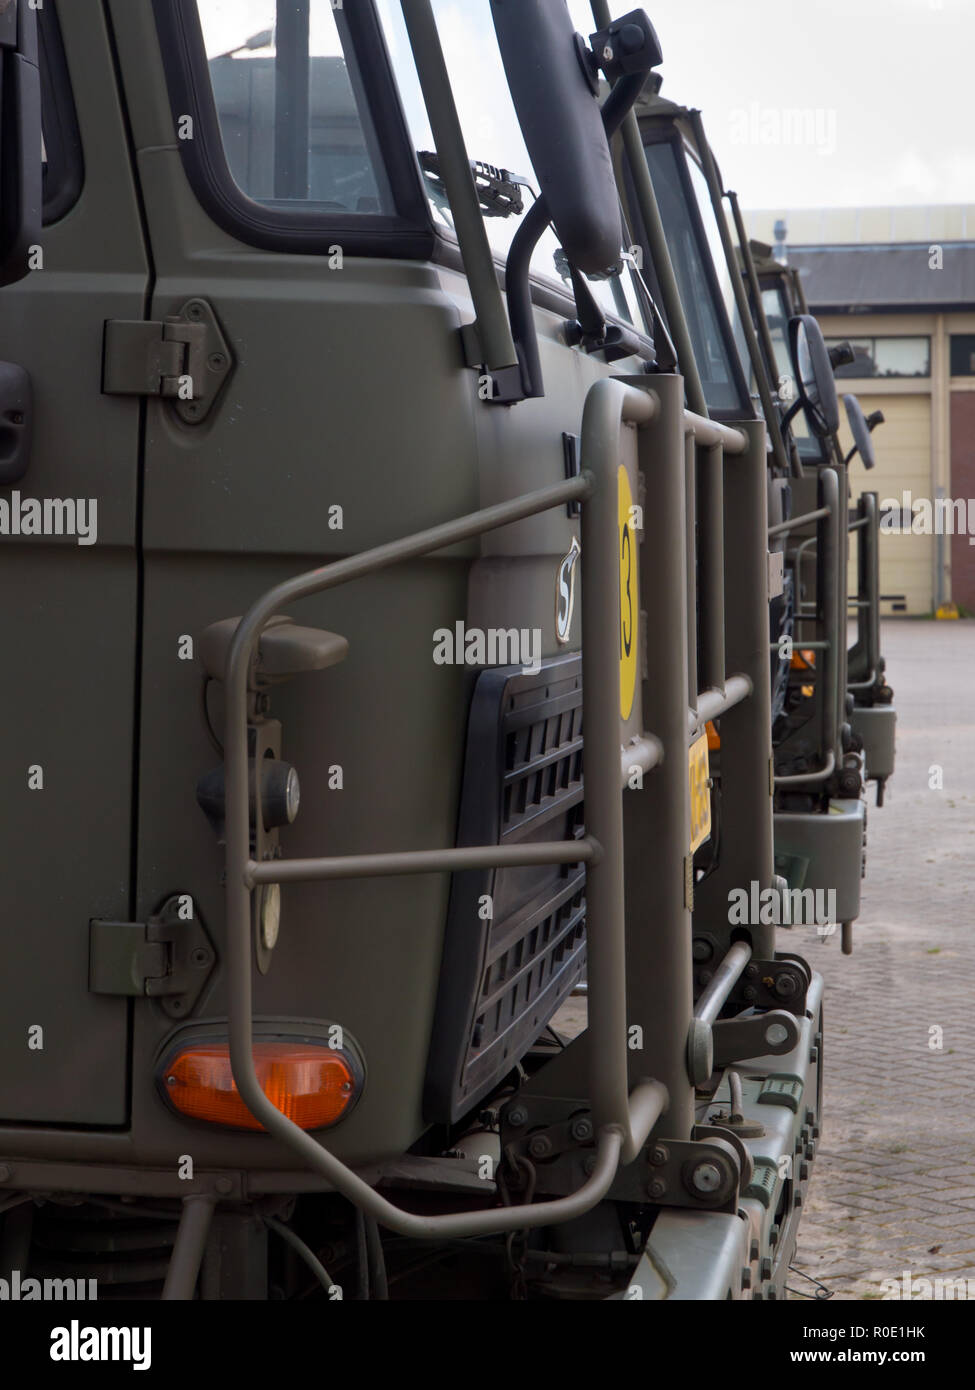 Army trucks lined up in formation Stock Photo